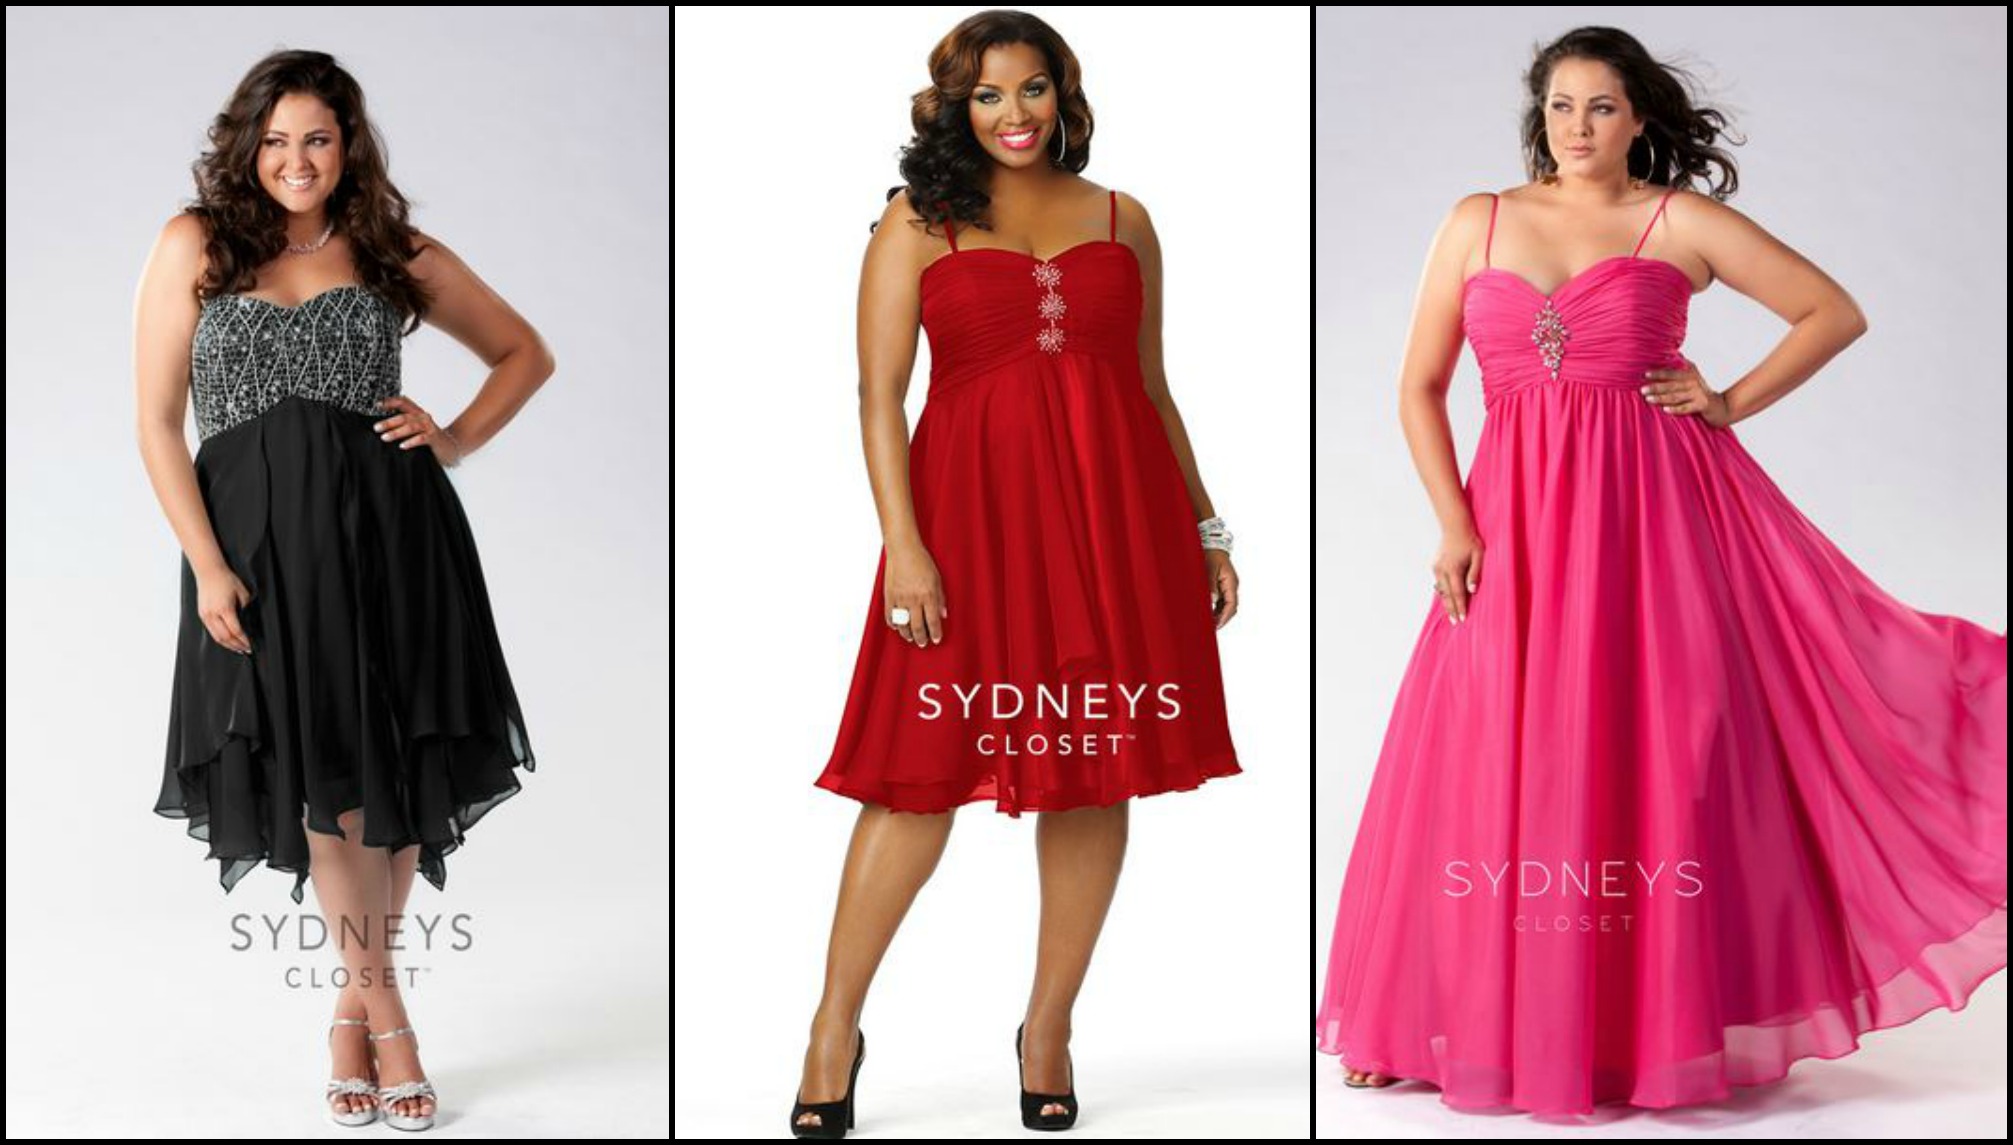 Plus Size Dresses For Special Events, Parties, Prom, & More